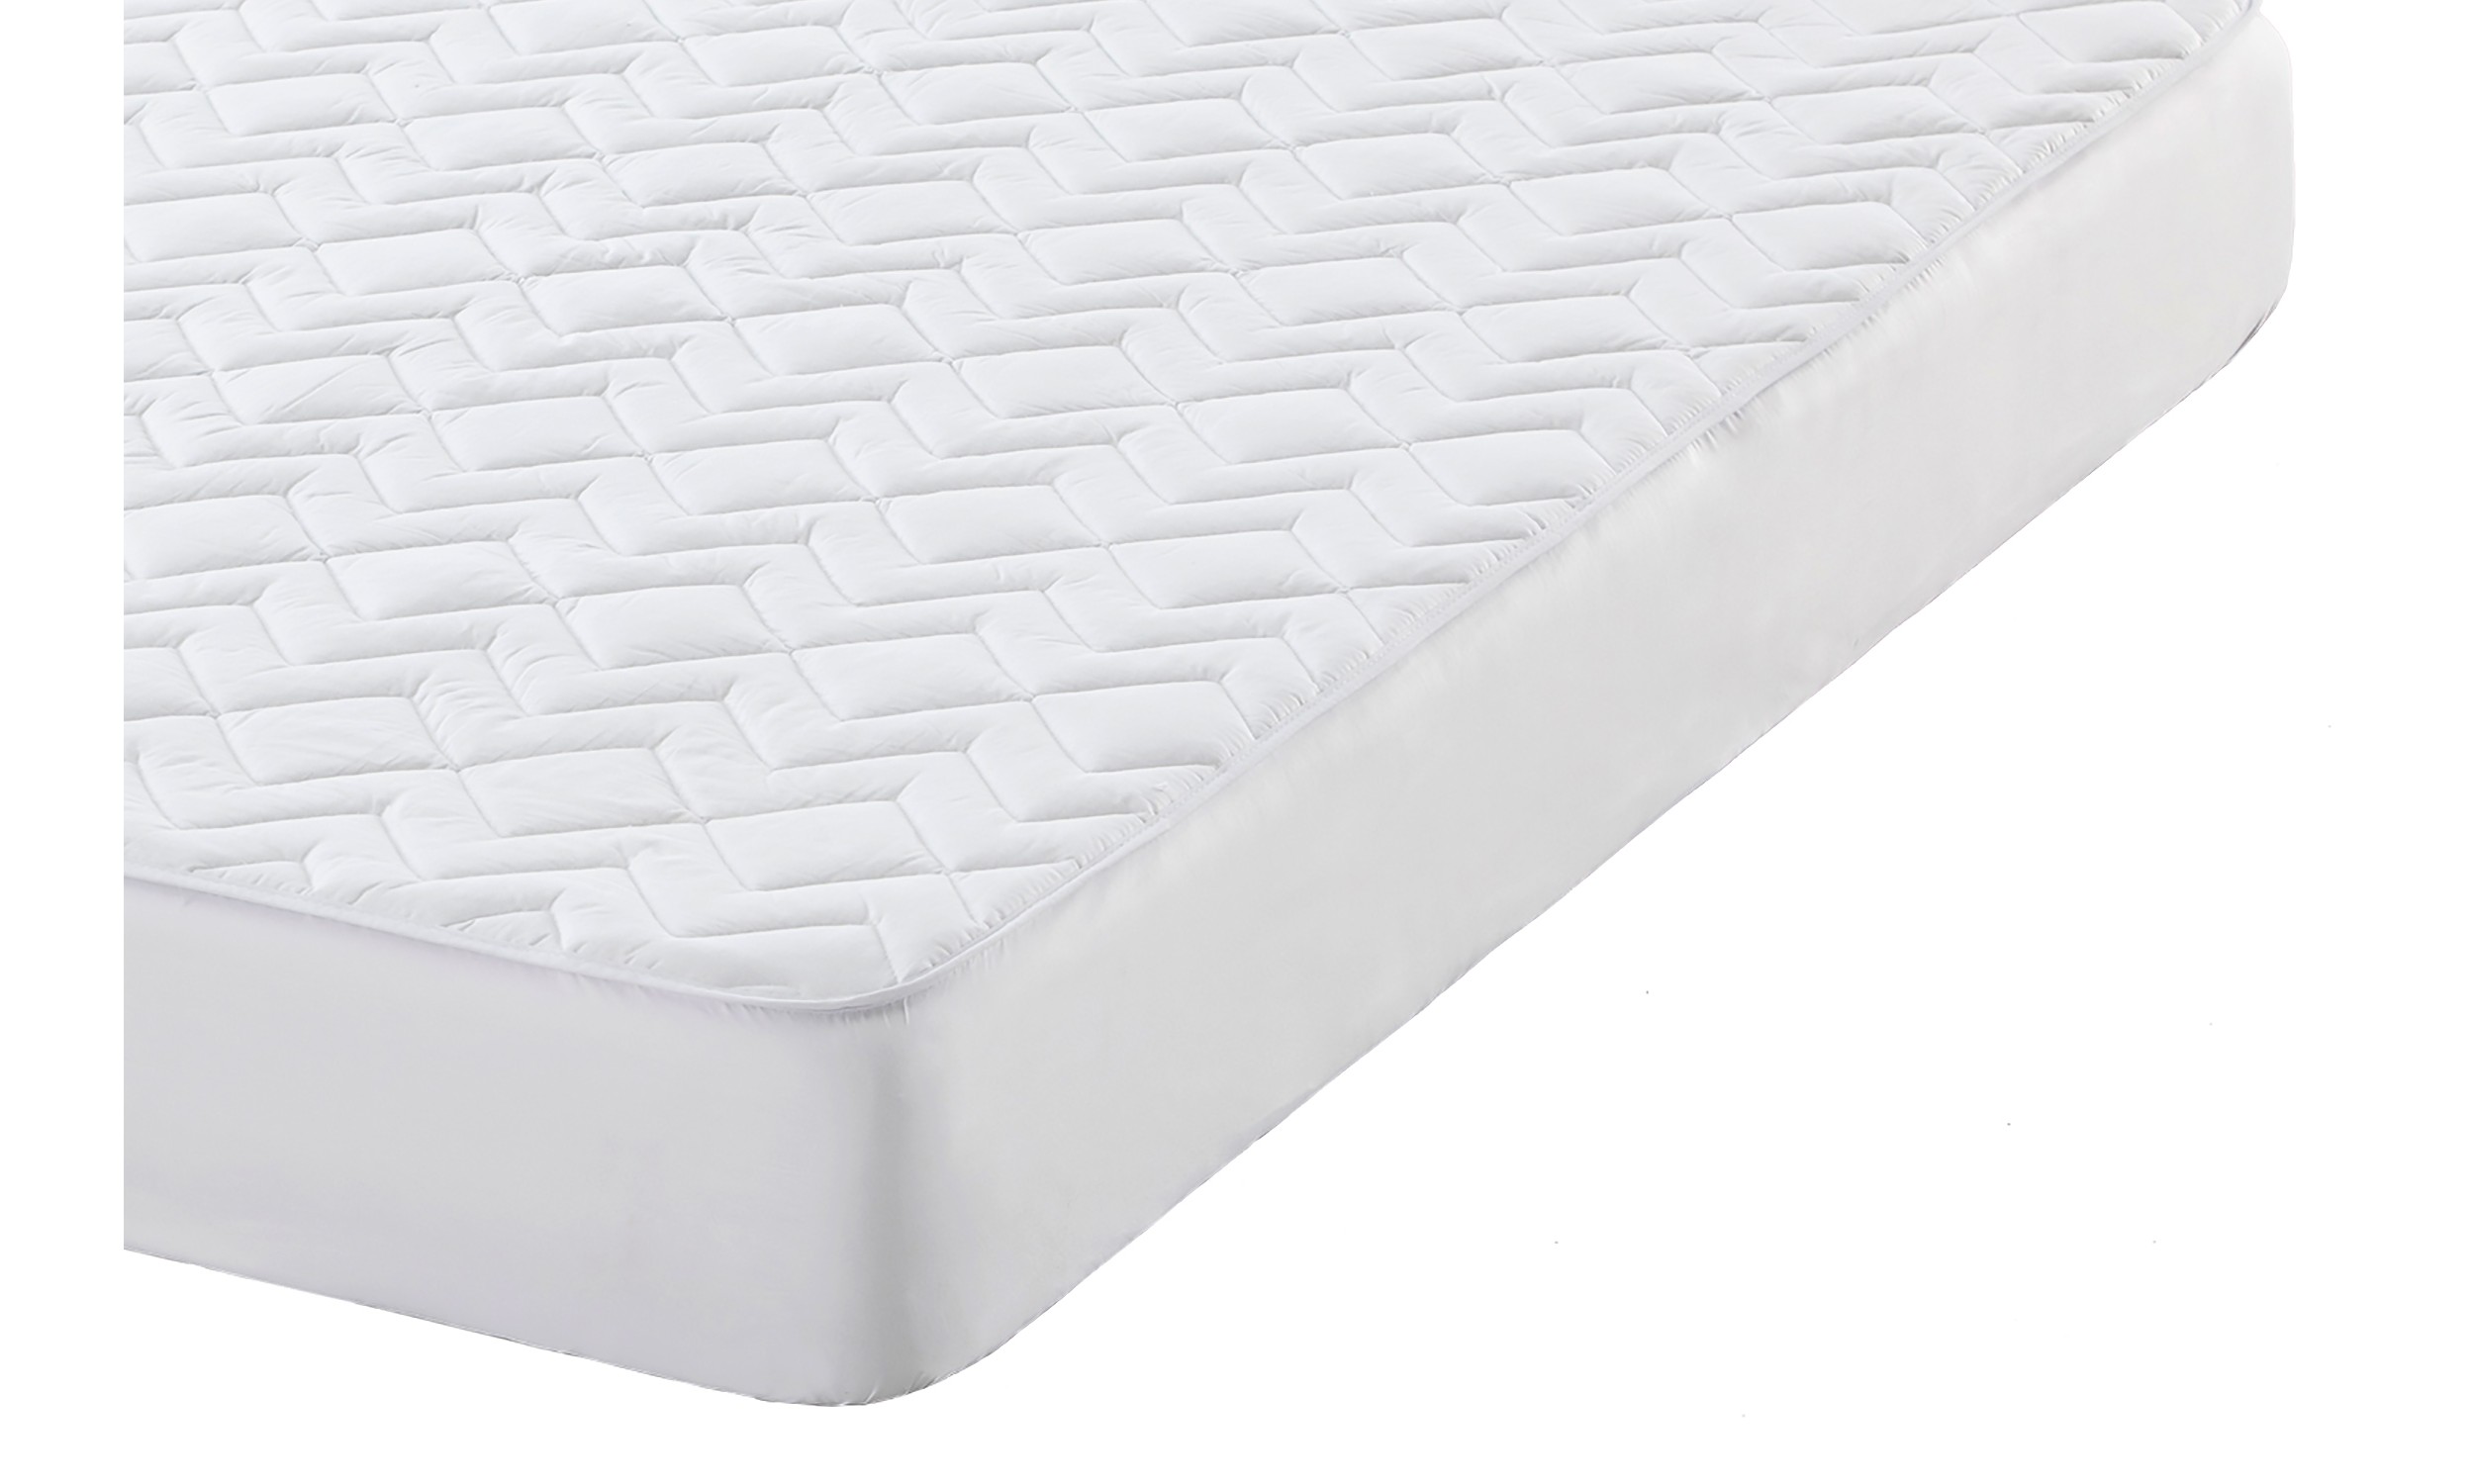 padded mattress cover for crib